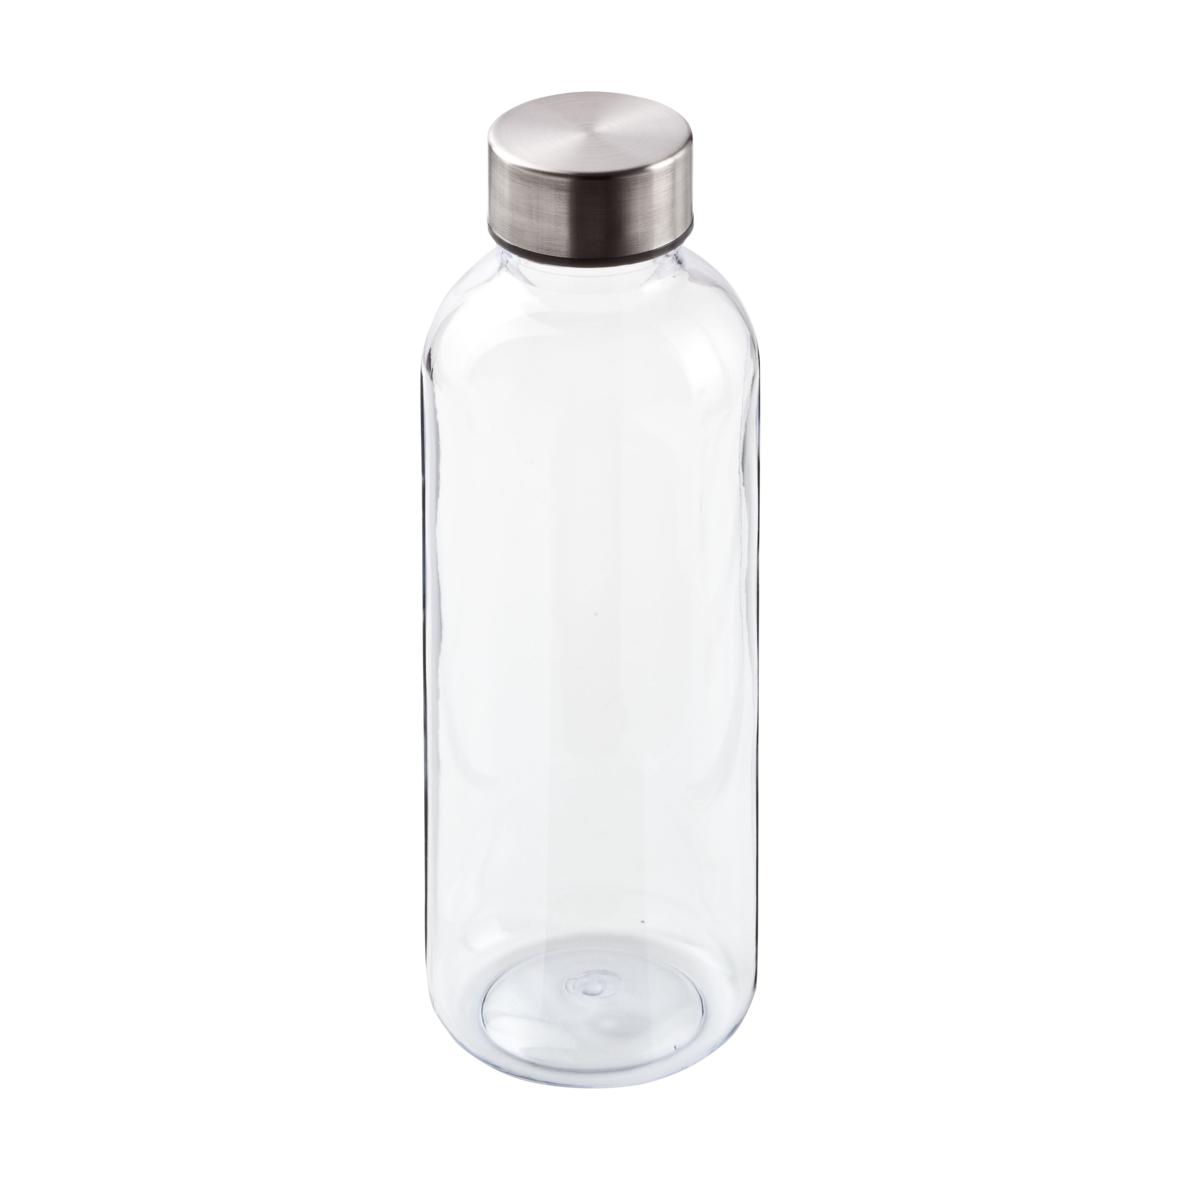 ClearFlow Bottle - Aston-Cantlow - Haslemere